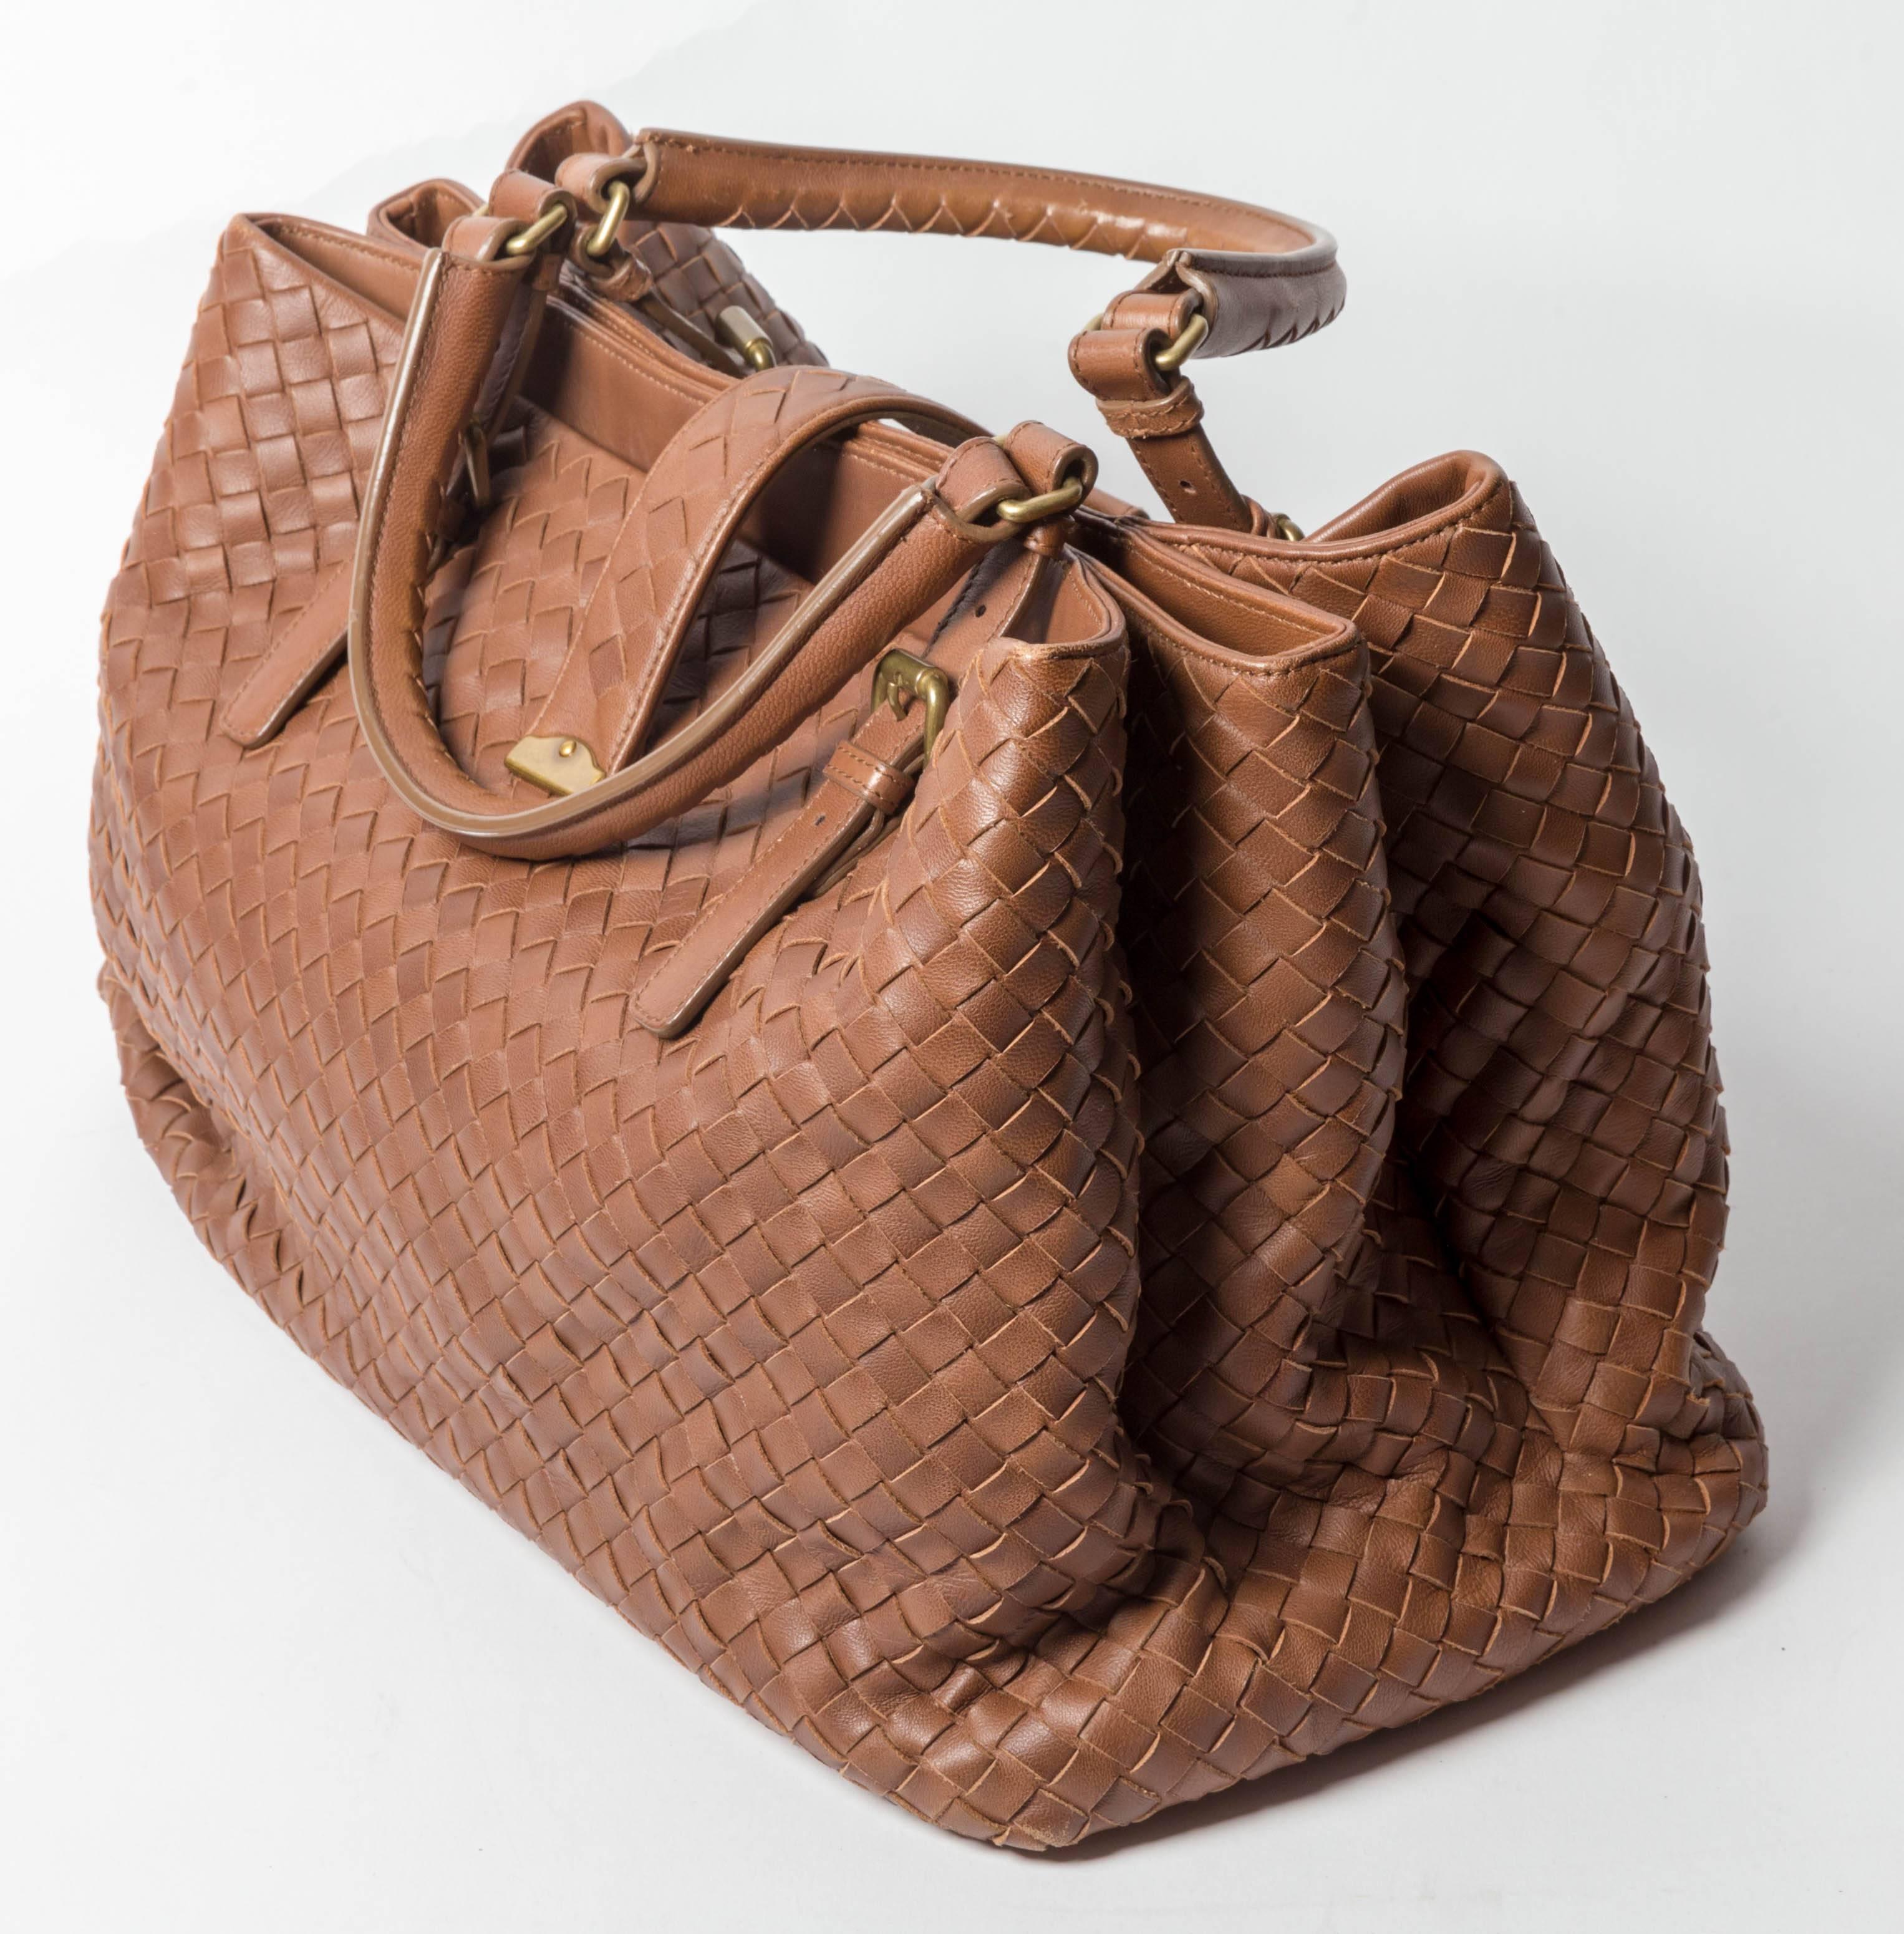 Hand woven brown  Intrecciato leather Bottega Veneta Medium Roma satchel with gold-tone hardware, rolled top handles, tonal suede lining, single zip pocket at interior wall, three spacious compartments (one with snap closure)  and push-lock closure